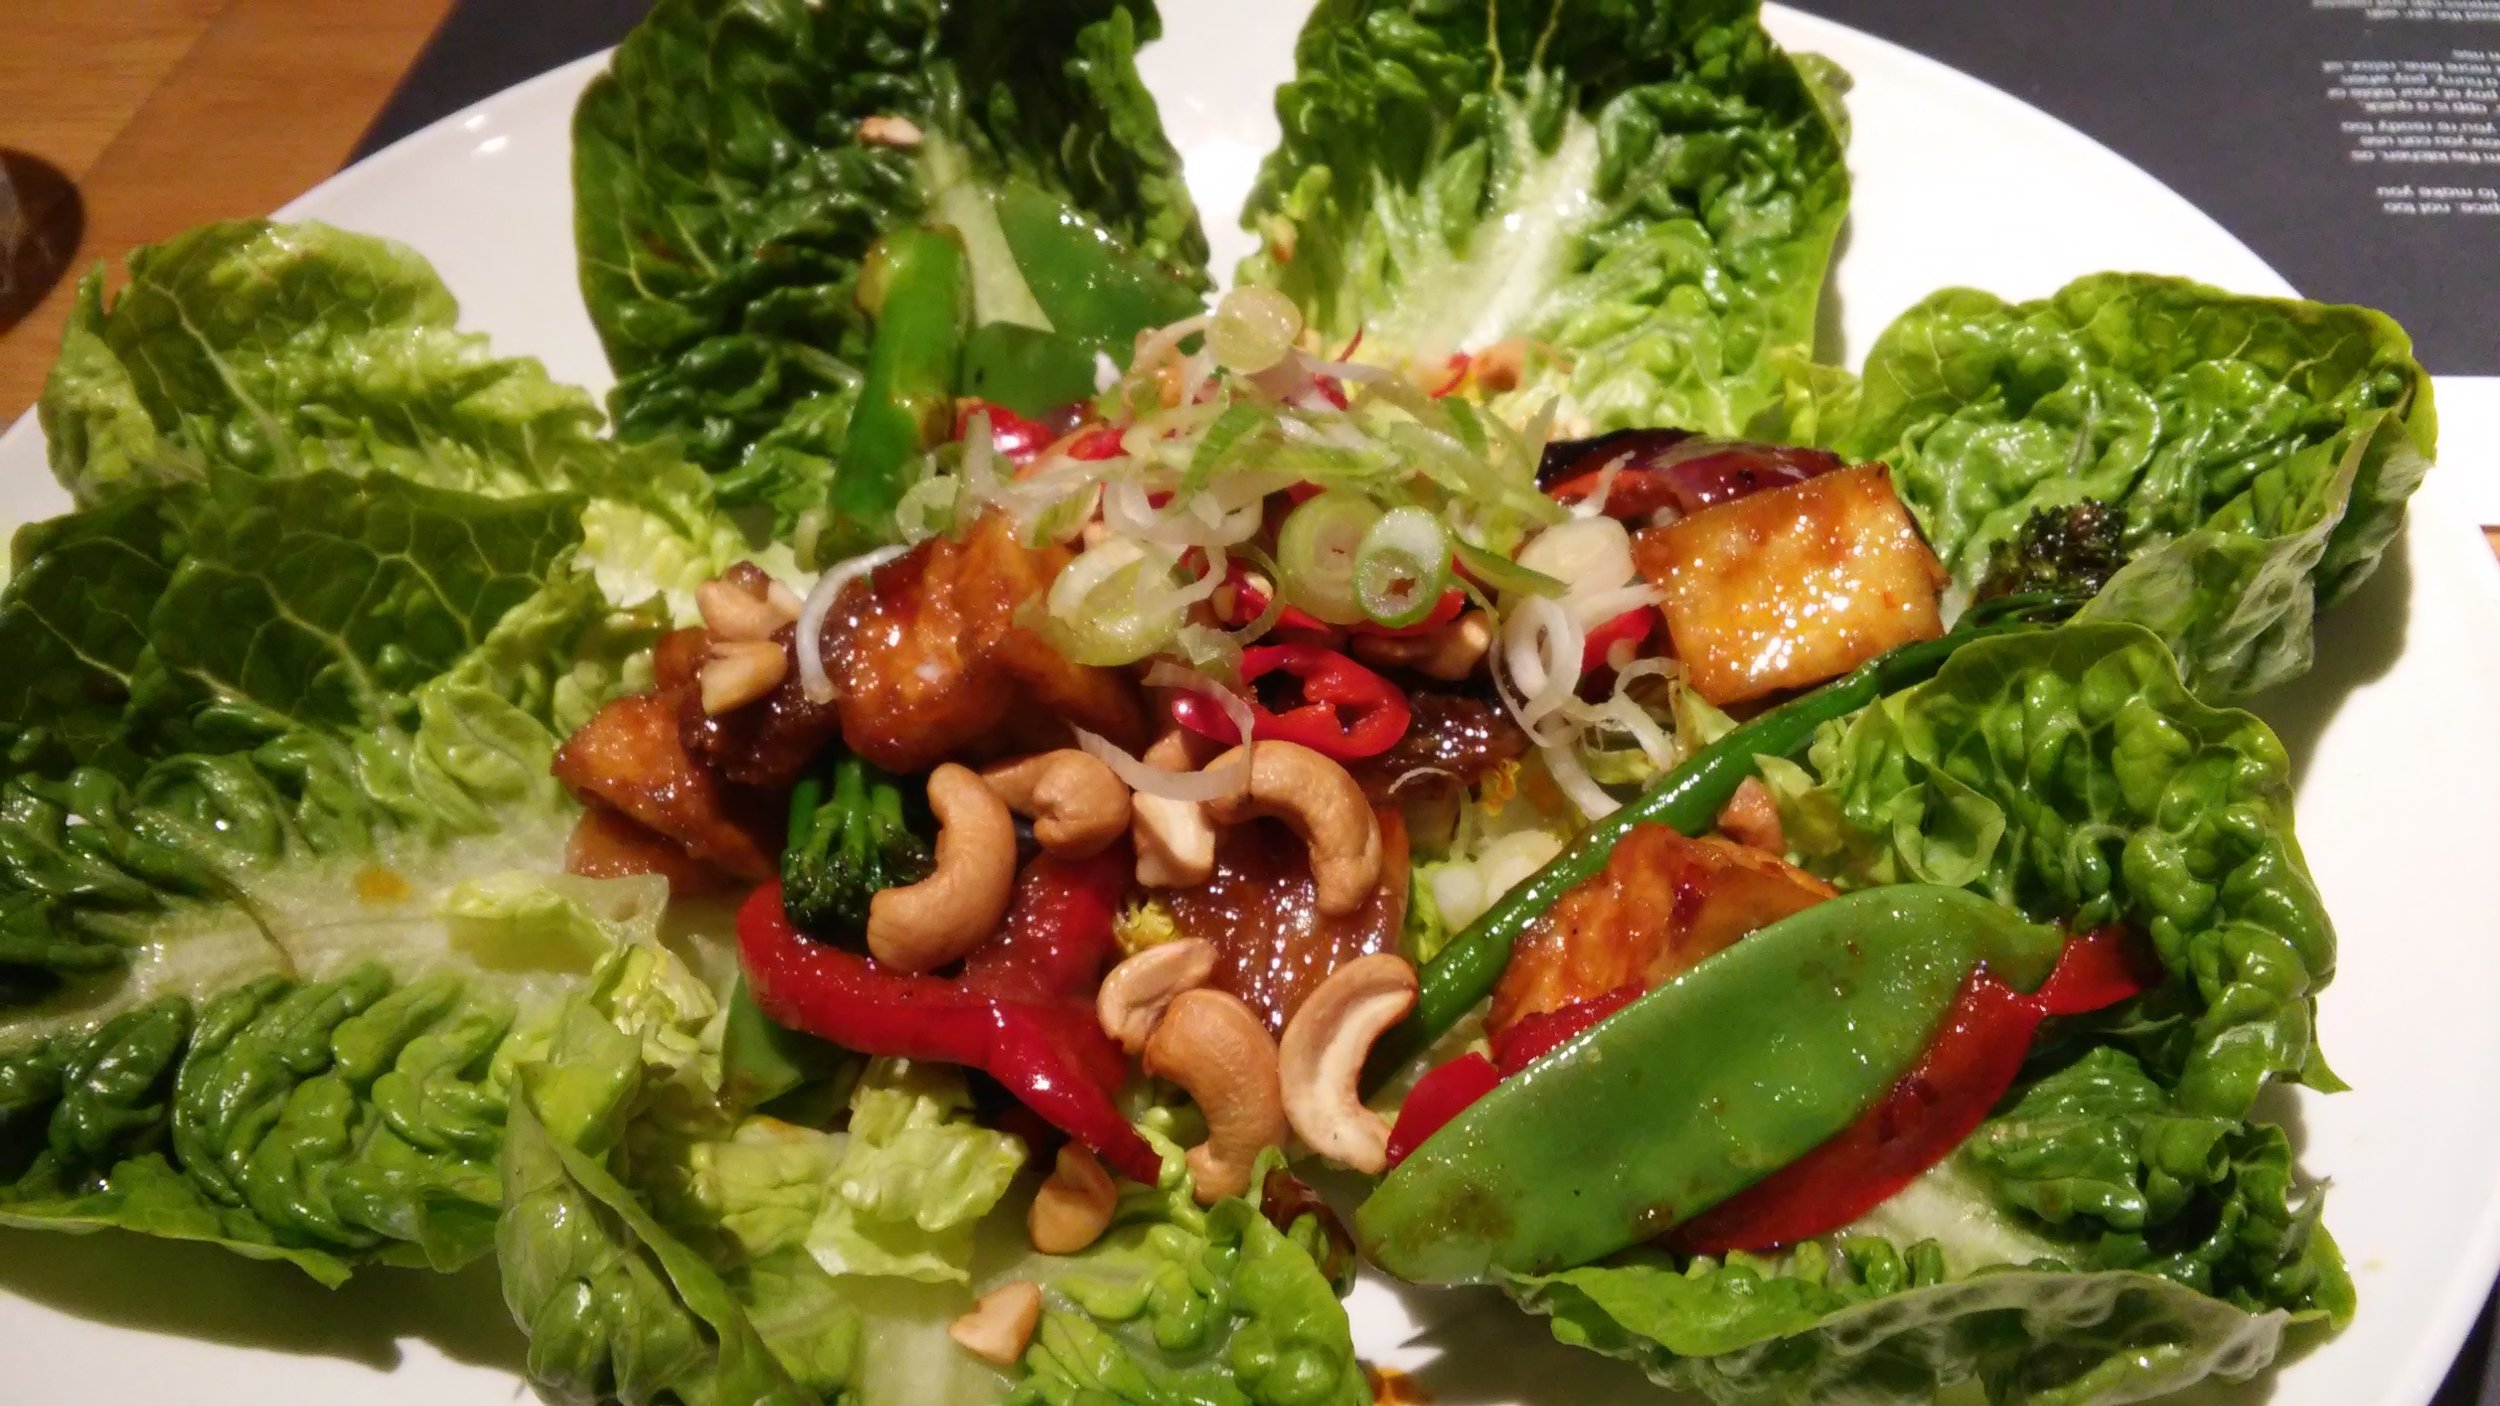 Find out how Wagamama has made ordering vegan food in their restaurants ...